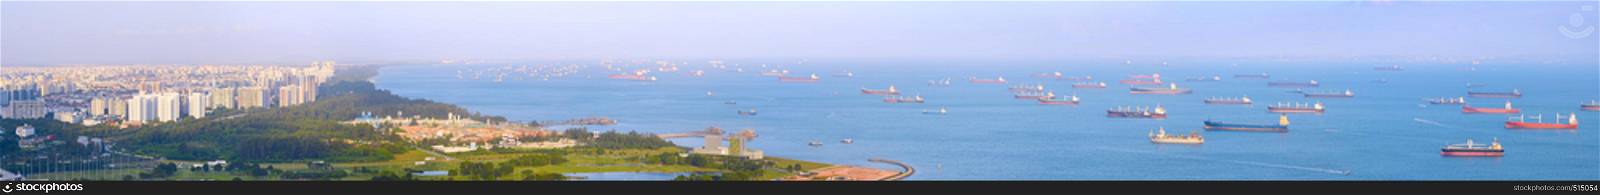 Panoramic view of Singapore harbor with many cargo ships at sunset. Singapore